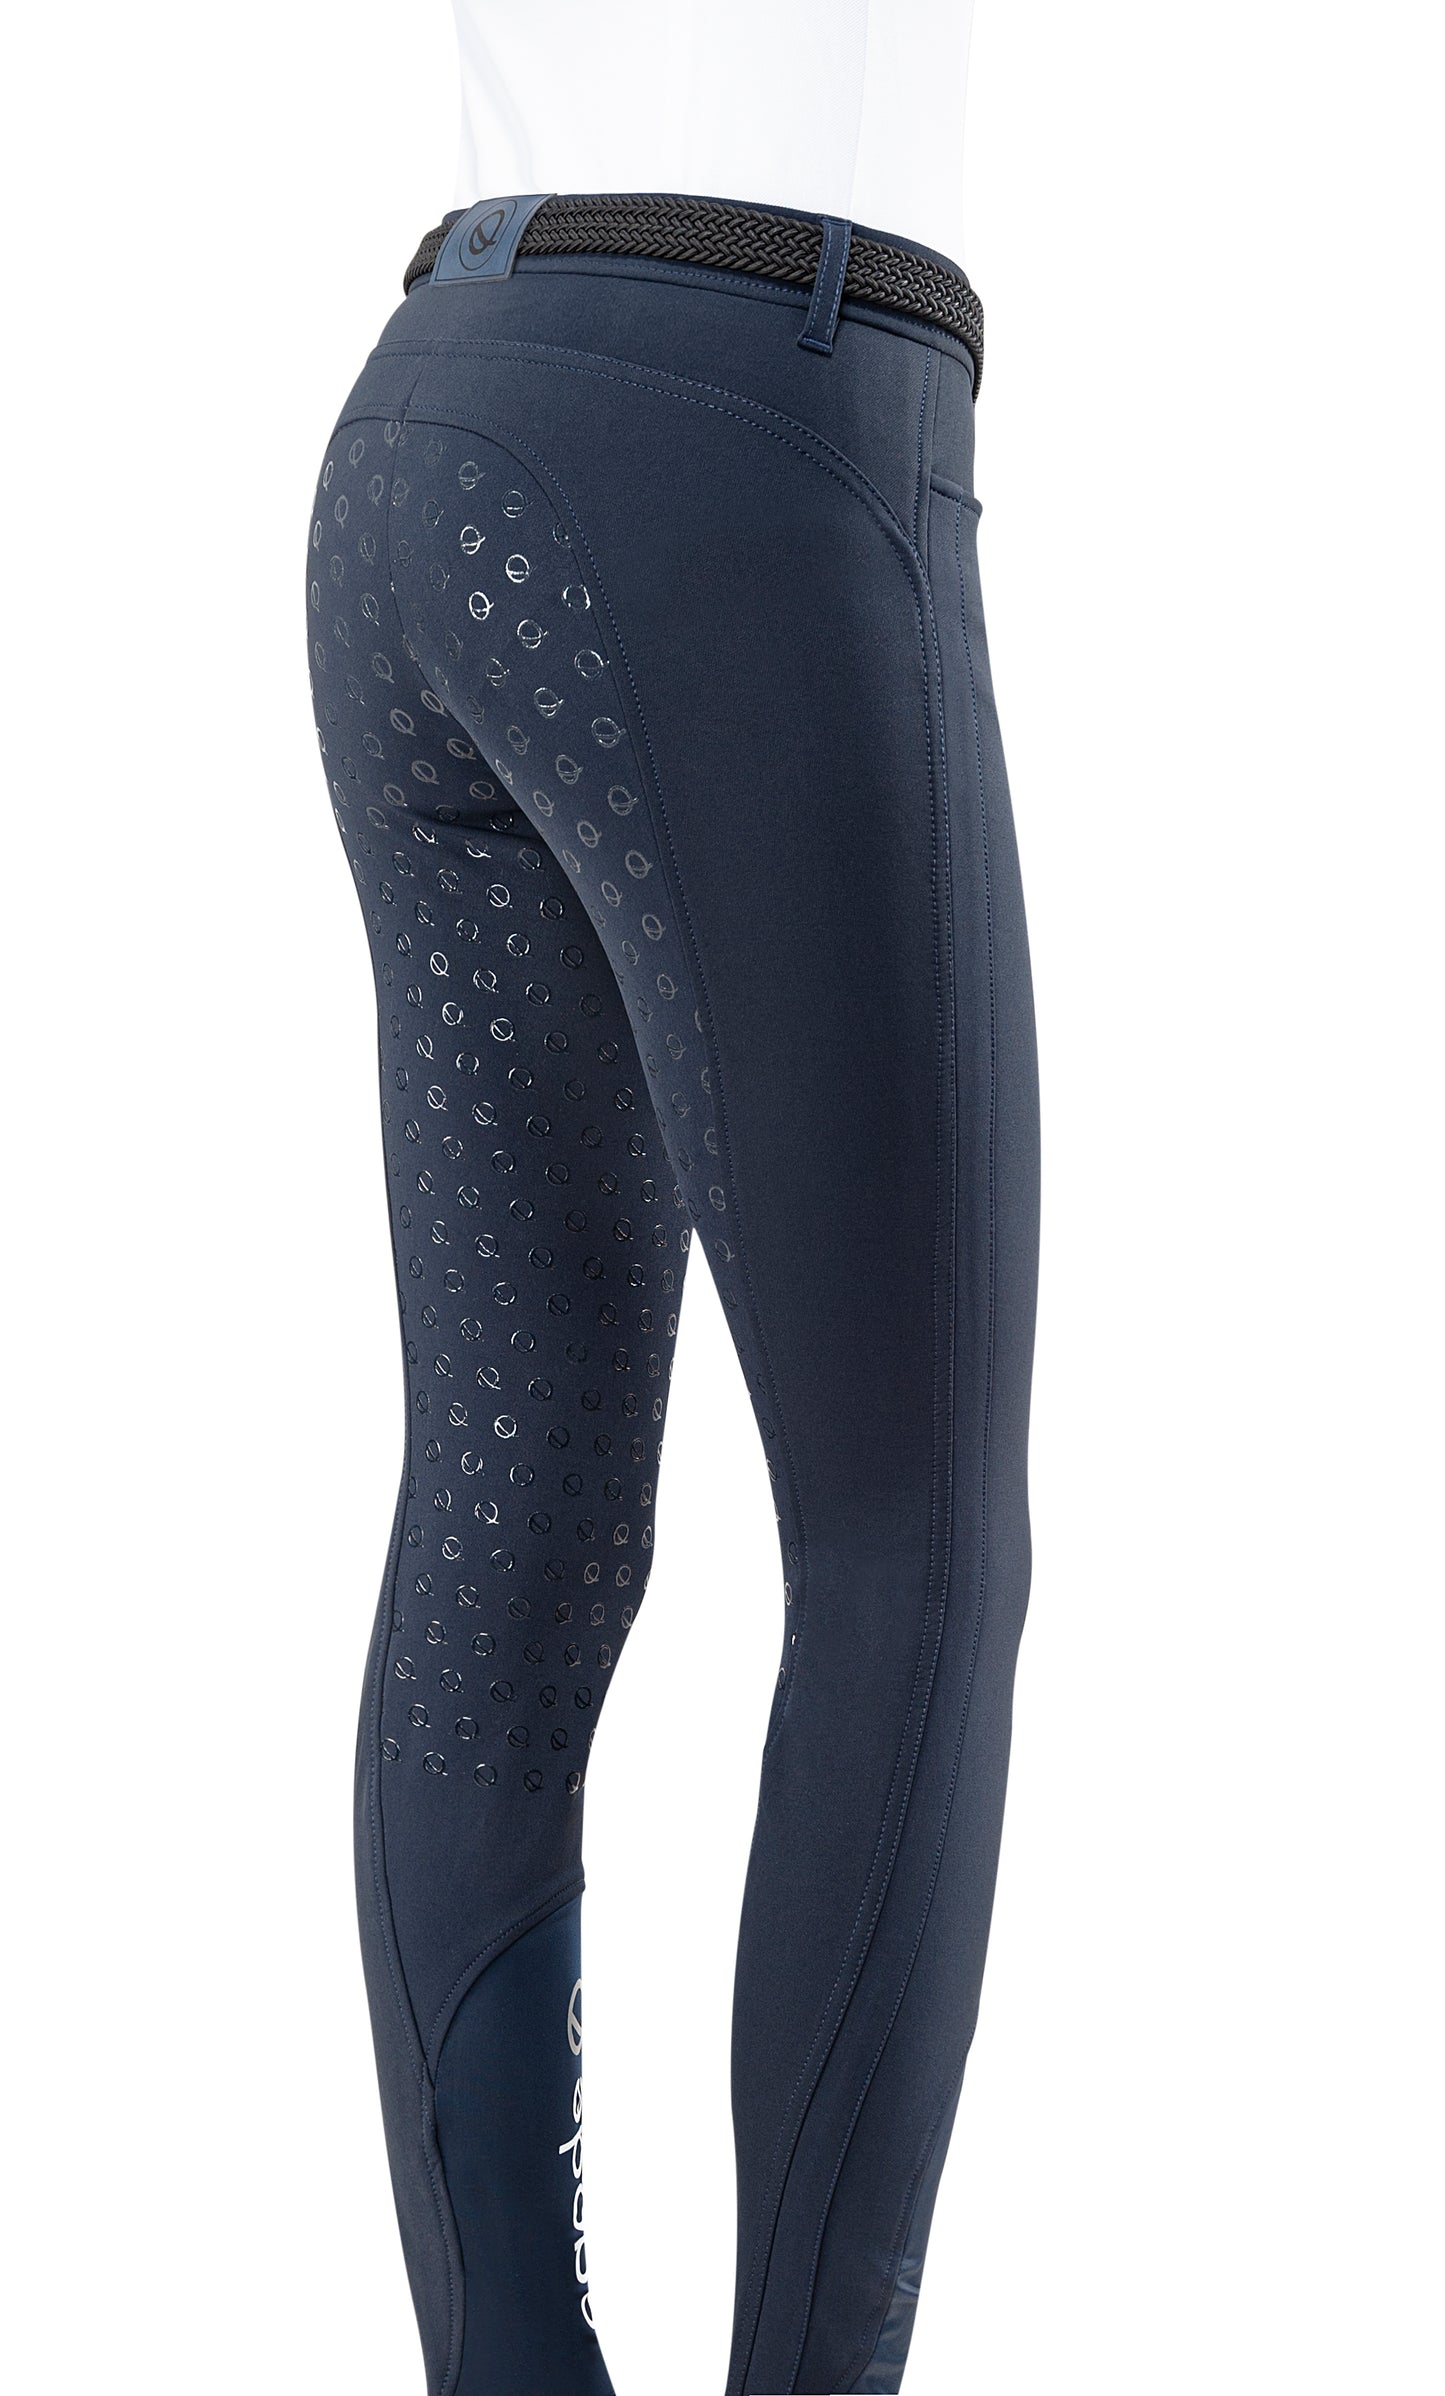 Pantalone Donna Full Grip |Eqode by Equiline | El gaucho store